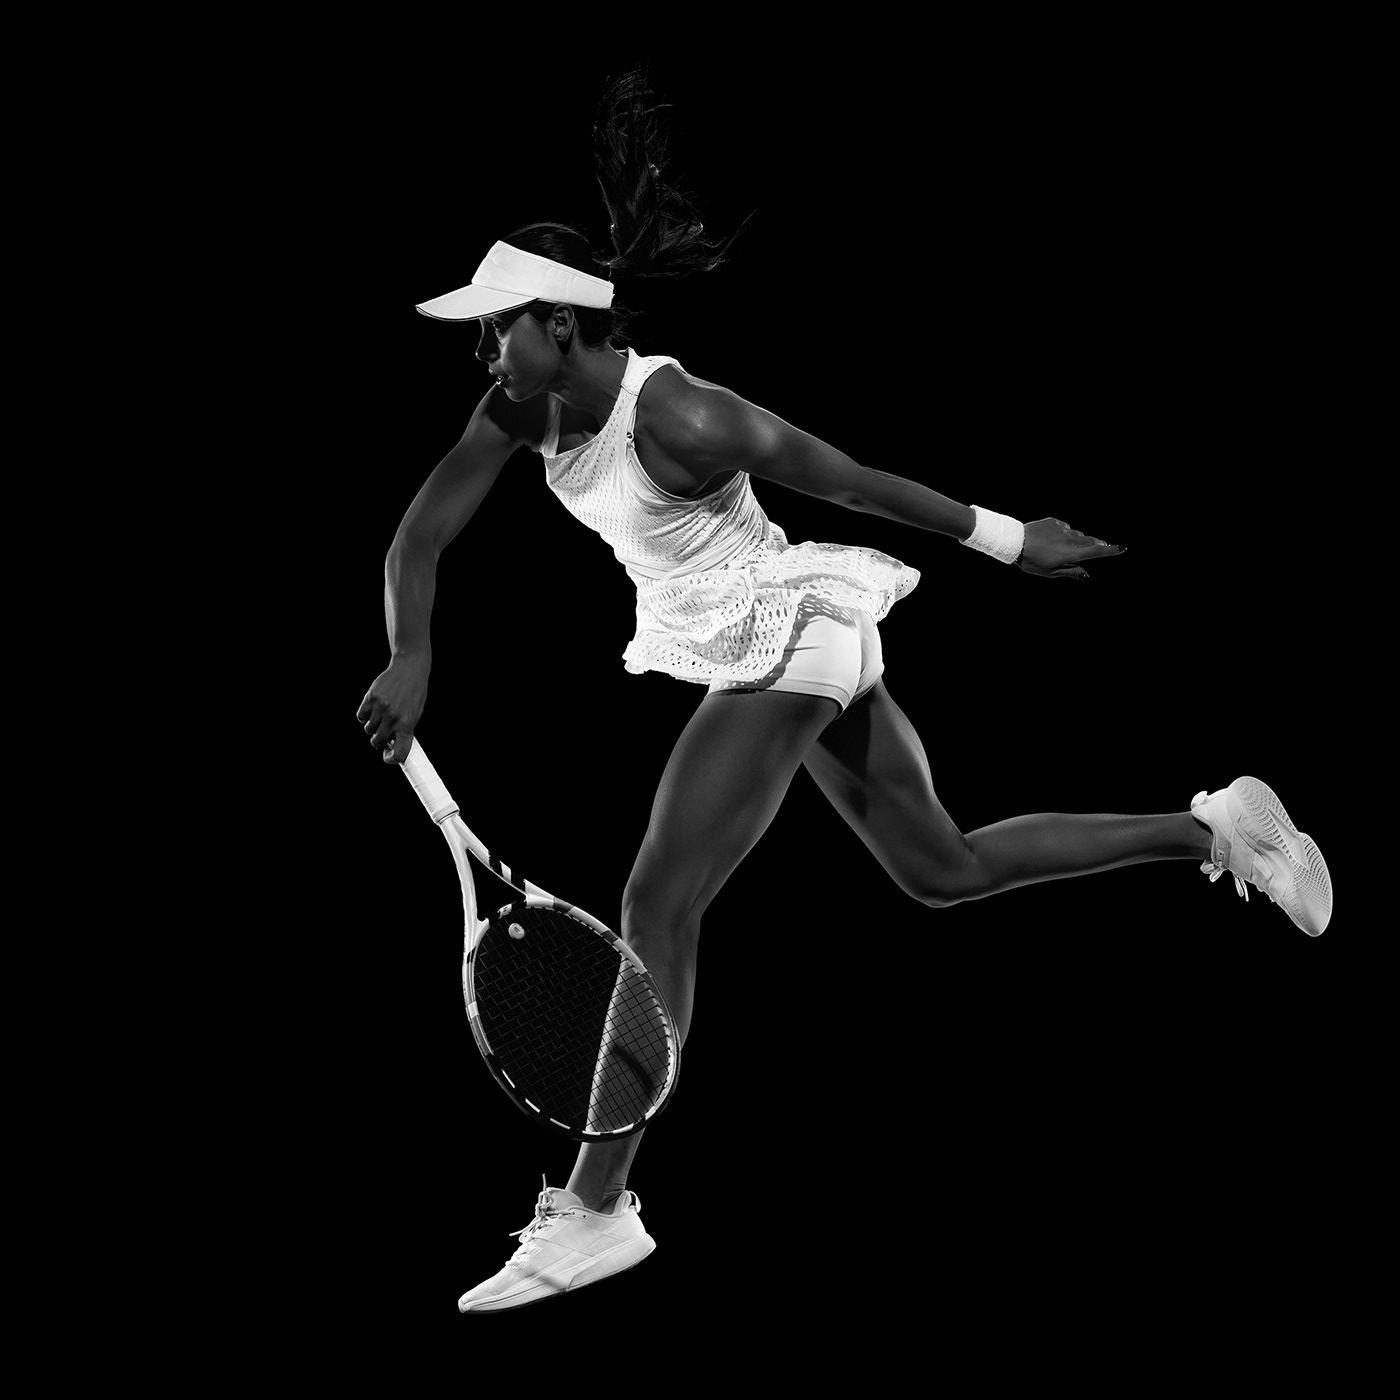 tennis sports black and white action photoshop bw